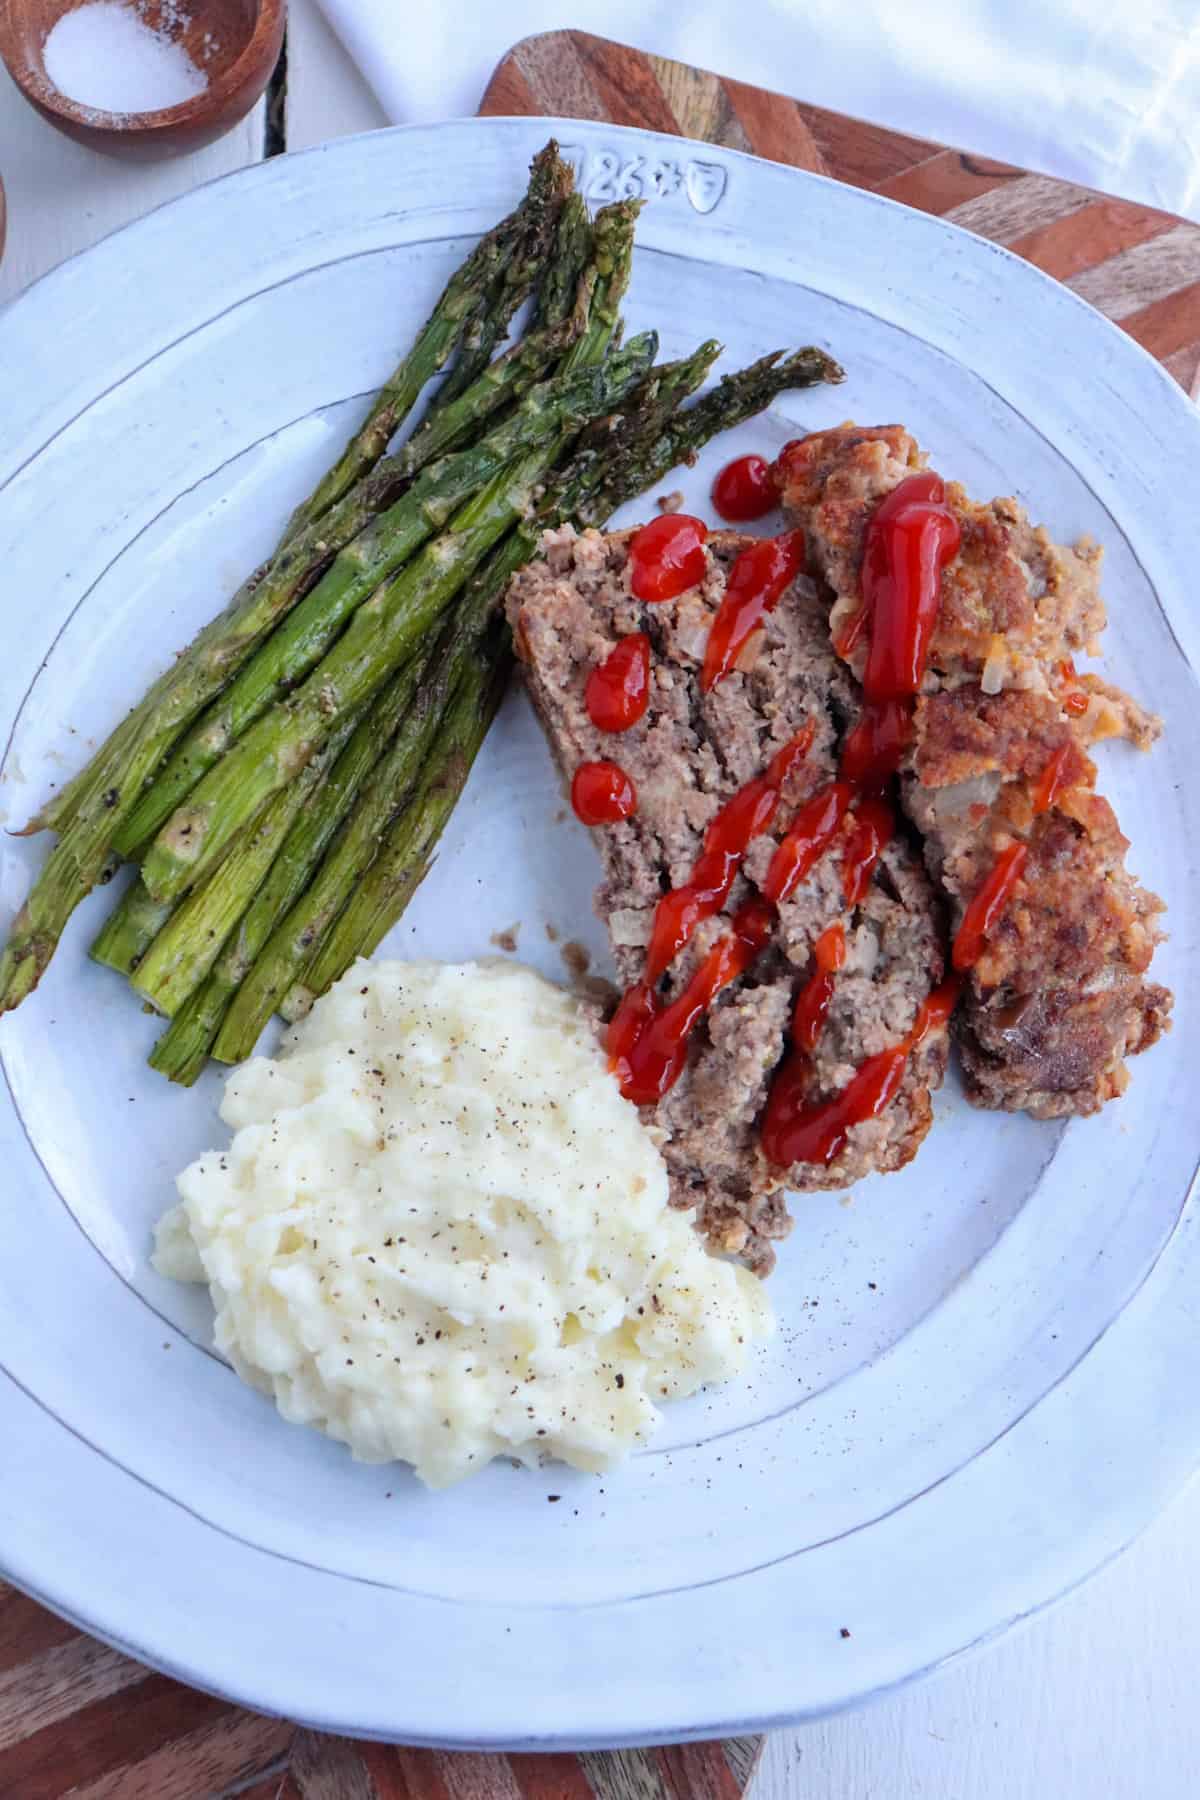 plate of ketchup covered venison meatloaf, mashed potatoes, and asparagus.